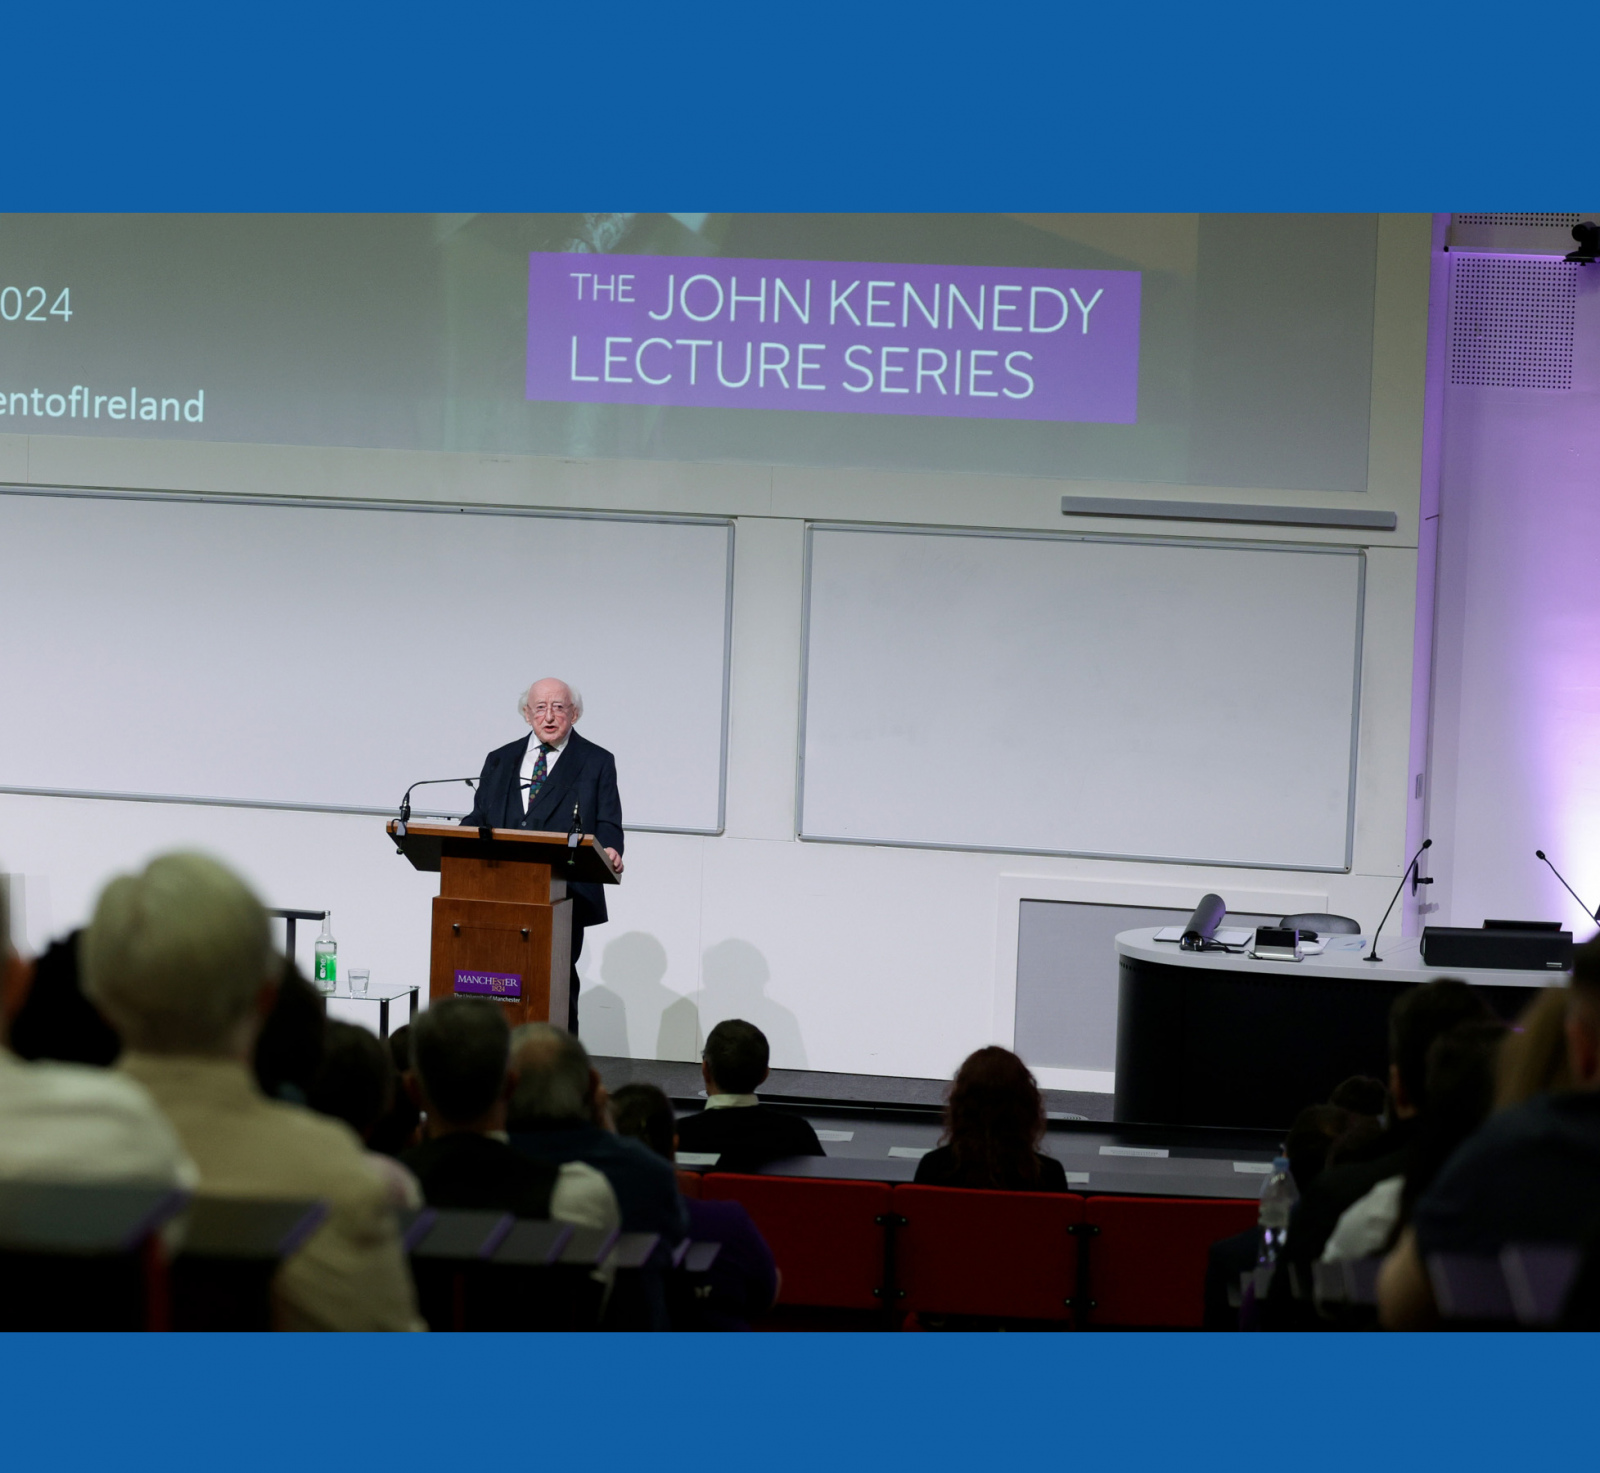 President delivers the inaugural Lecture of the John Kennedy Lecture Series